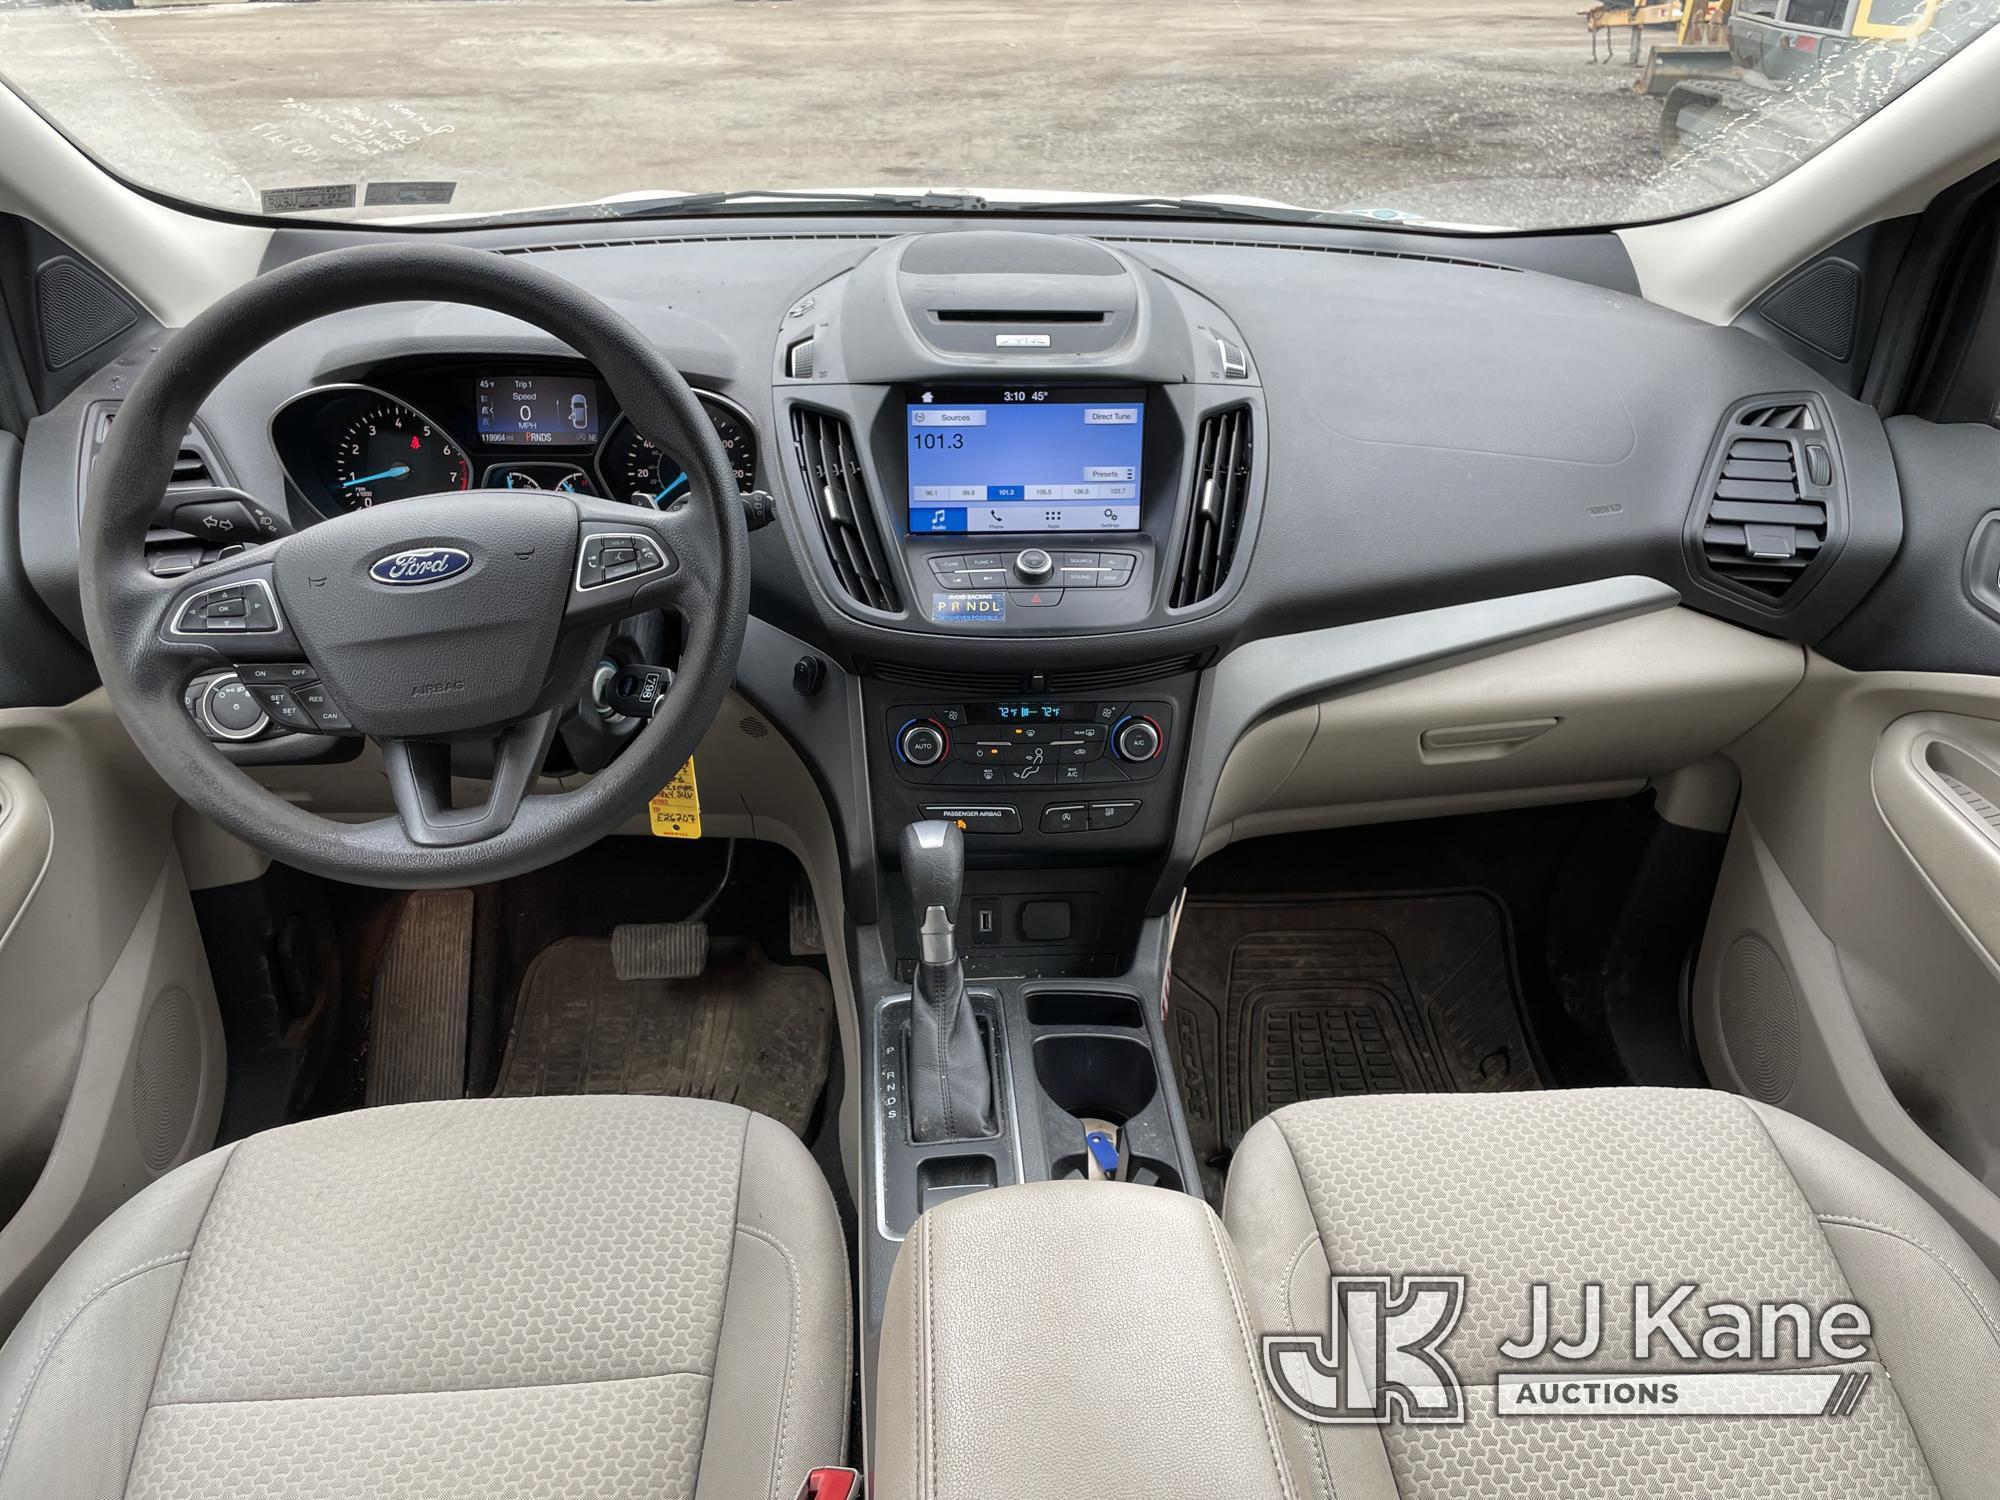 (Plymouth Meeting, PA) 2017 Ford Escape 4x4 4-Door Sport Utility Vehicle Bad Trans. Runs & Moves, Bo